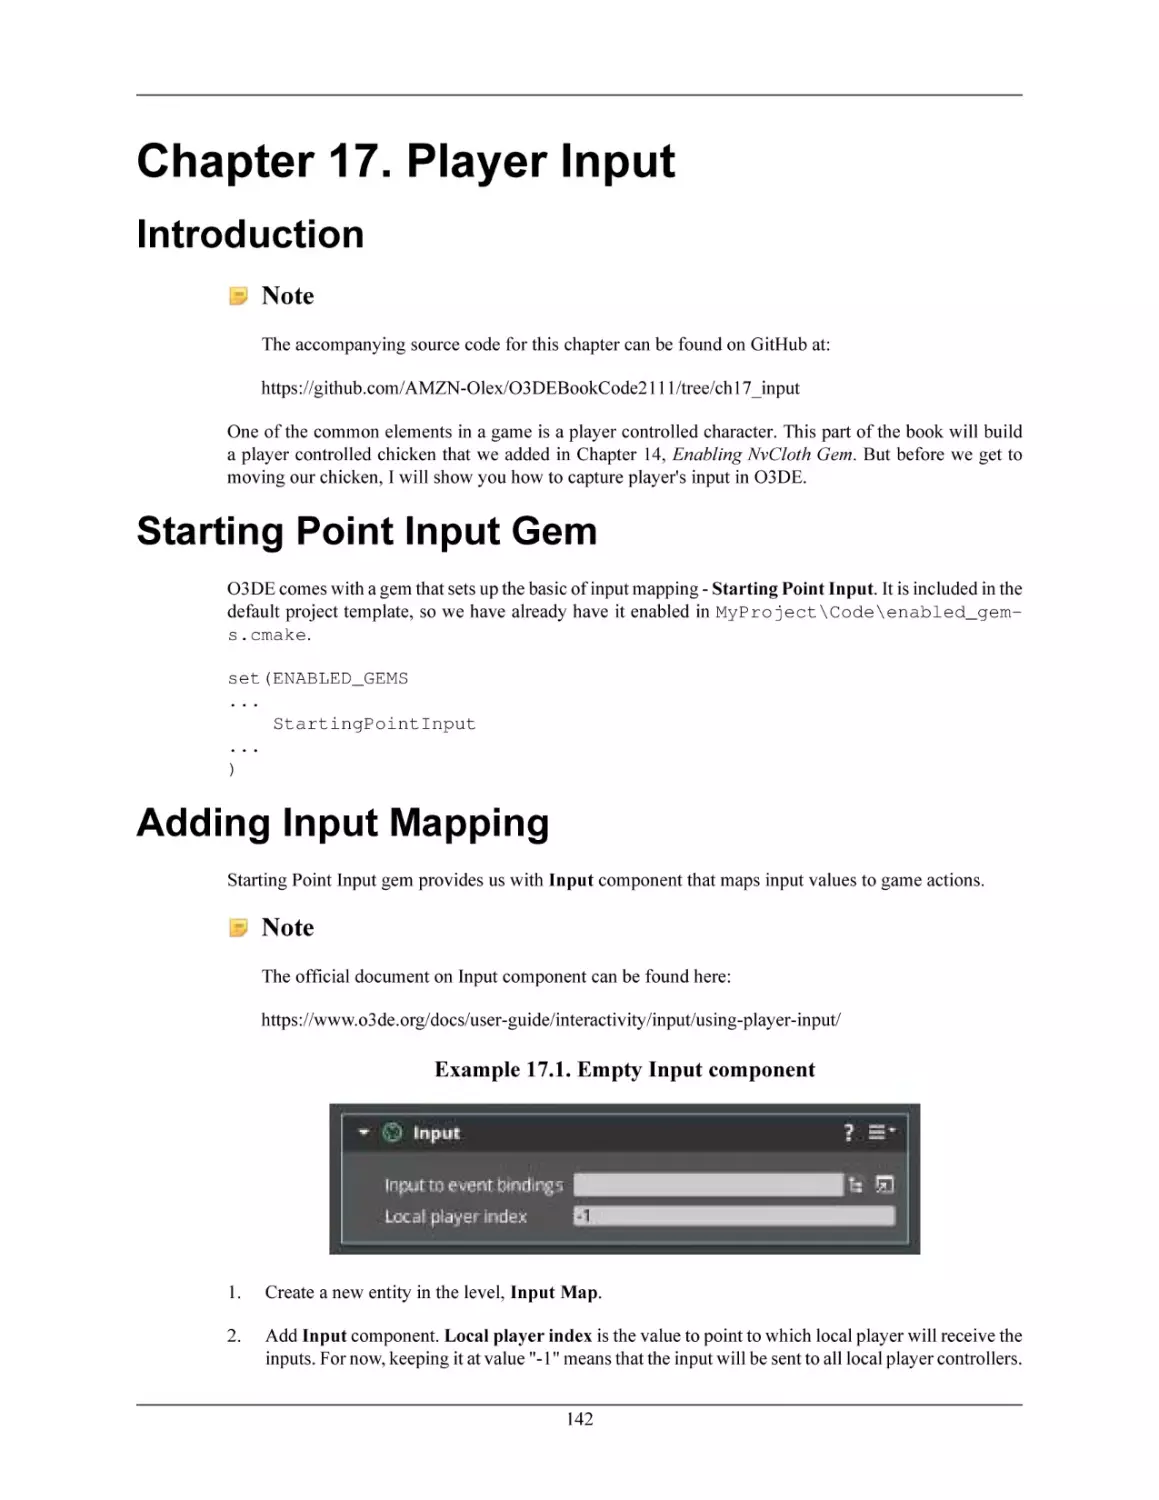 Chapter 17. Player Input
Introduction
Starting Point Input Gem
Adding Input Mapping